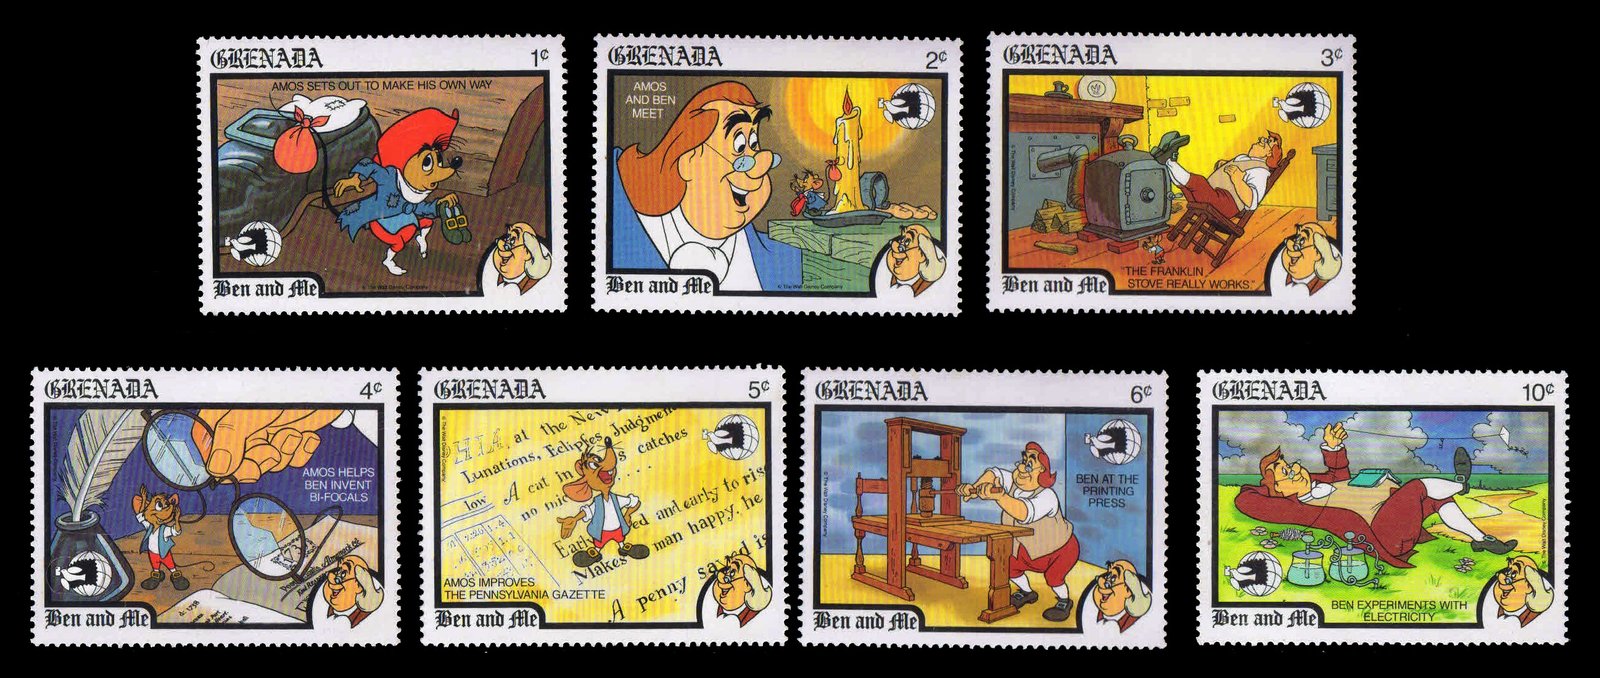 GRENADA 1989, Ben and Me, Disney Cartoon Characters, Set of 7 Stamps, MNH, S.G. 2056-2062